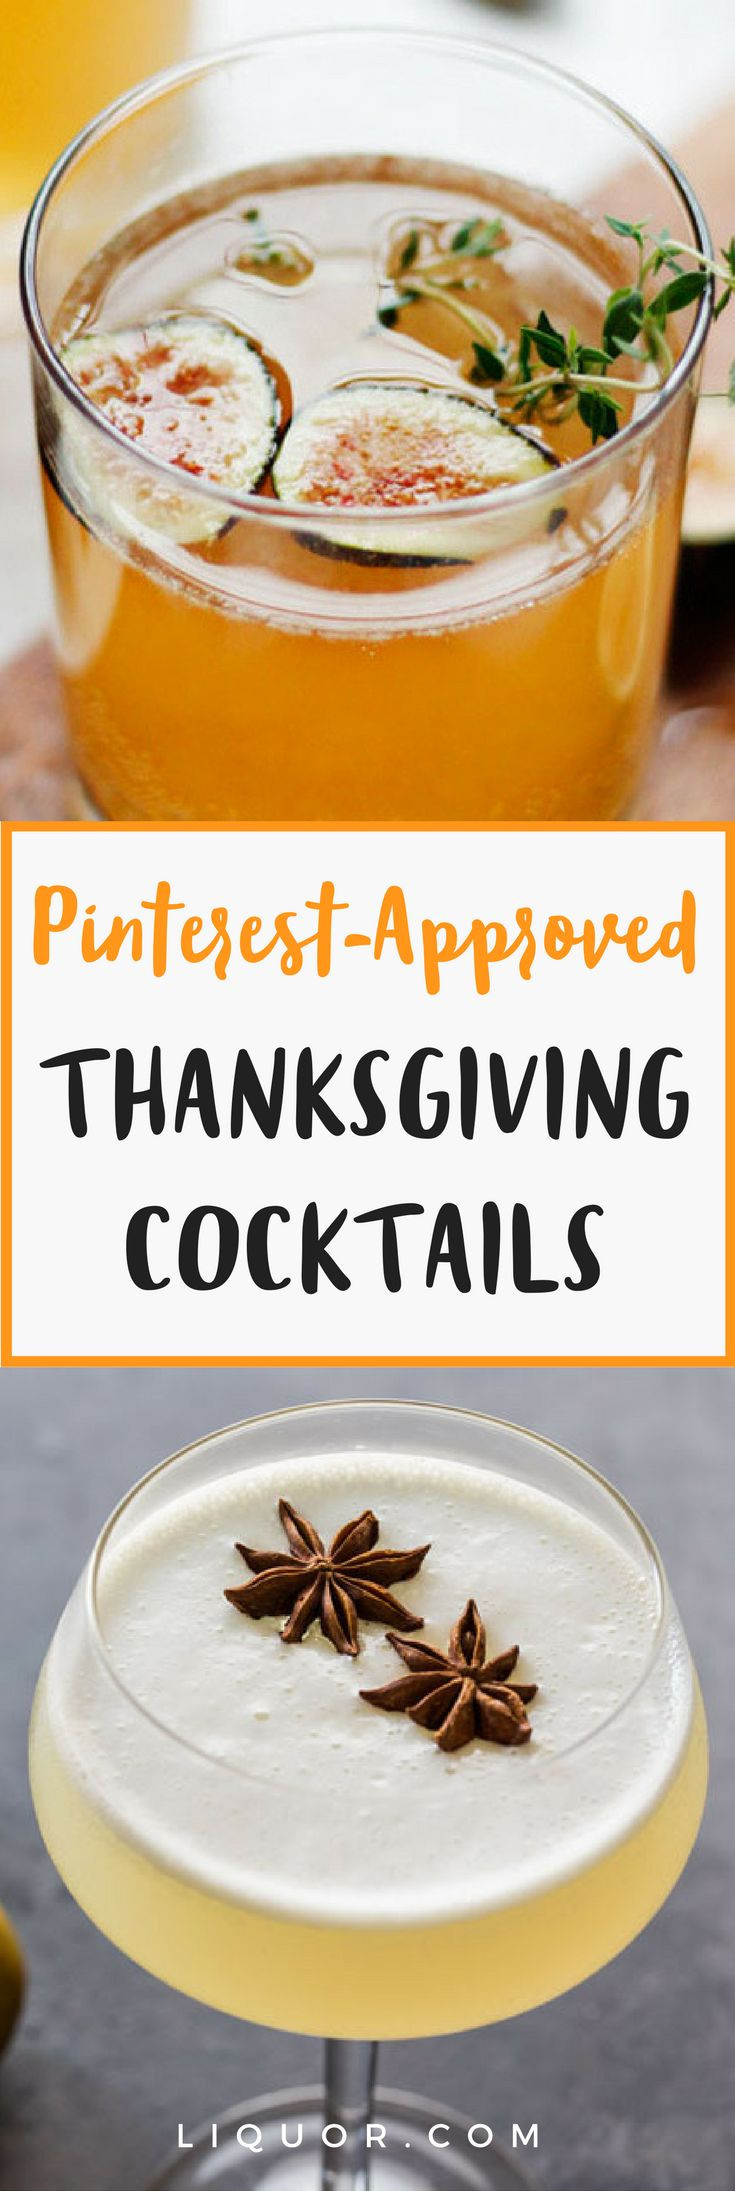 Thanksgiving Themed Drinks
 2611 best cocktails images on Pinterest